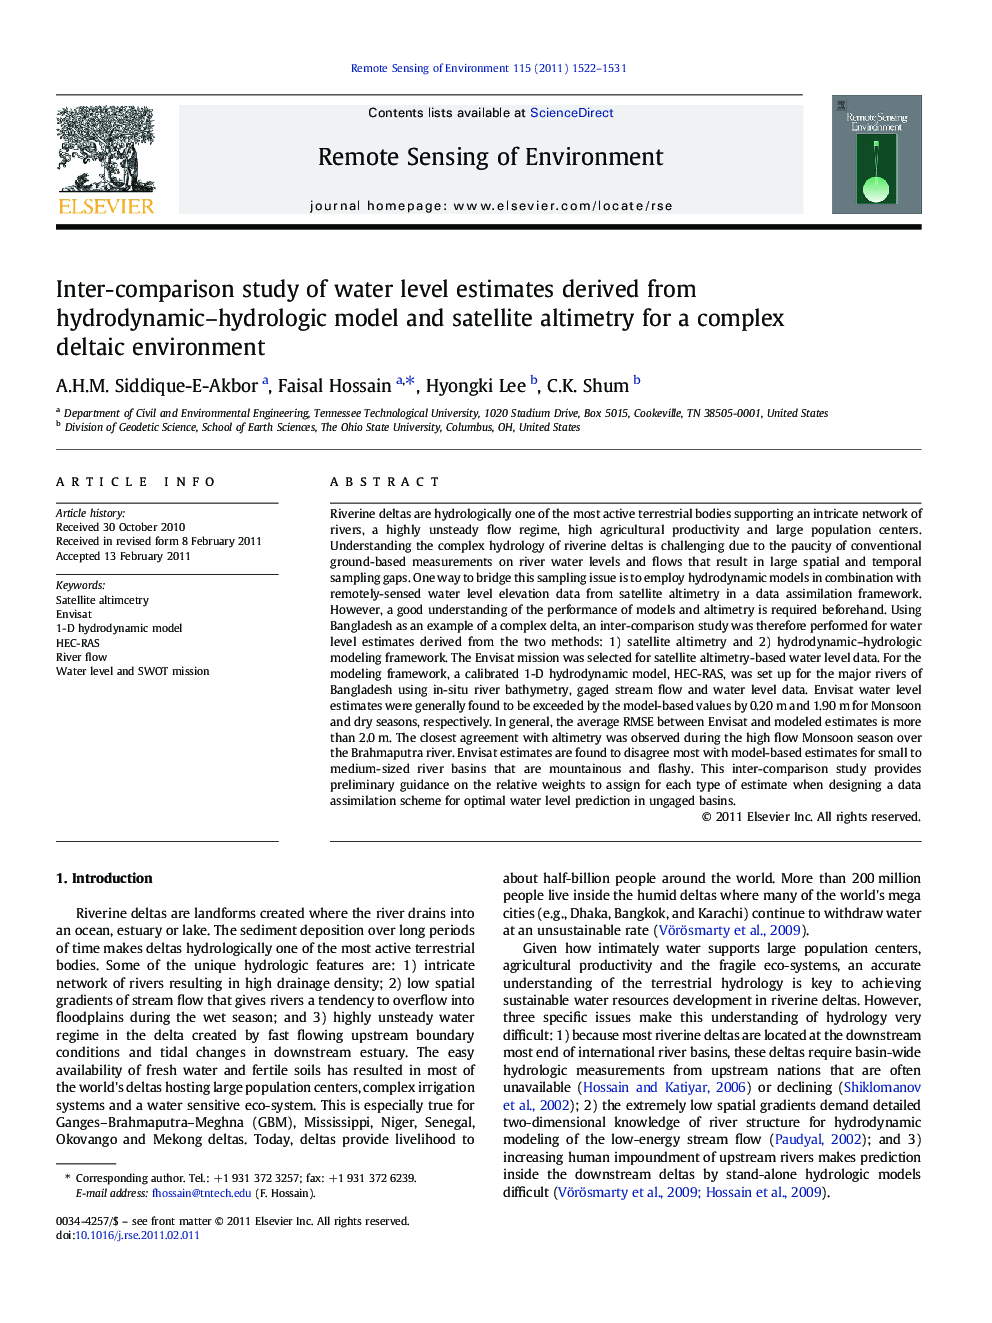 Inter-comparison study of water level estimates derived from hydrodynamic–hydrologic model and satellite altimetry for a complex deltaic environment